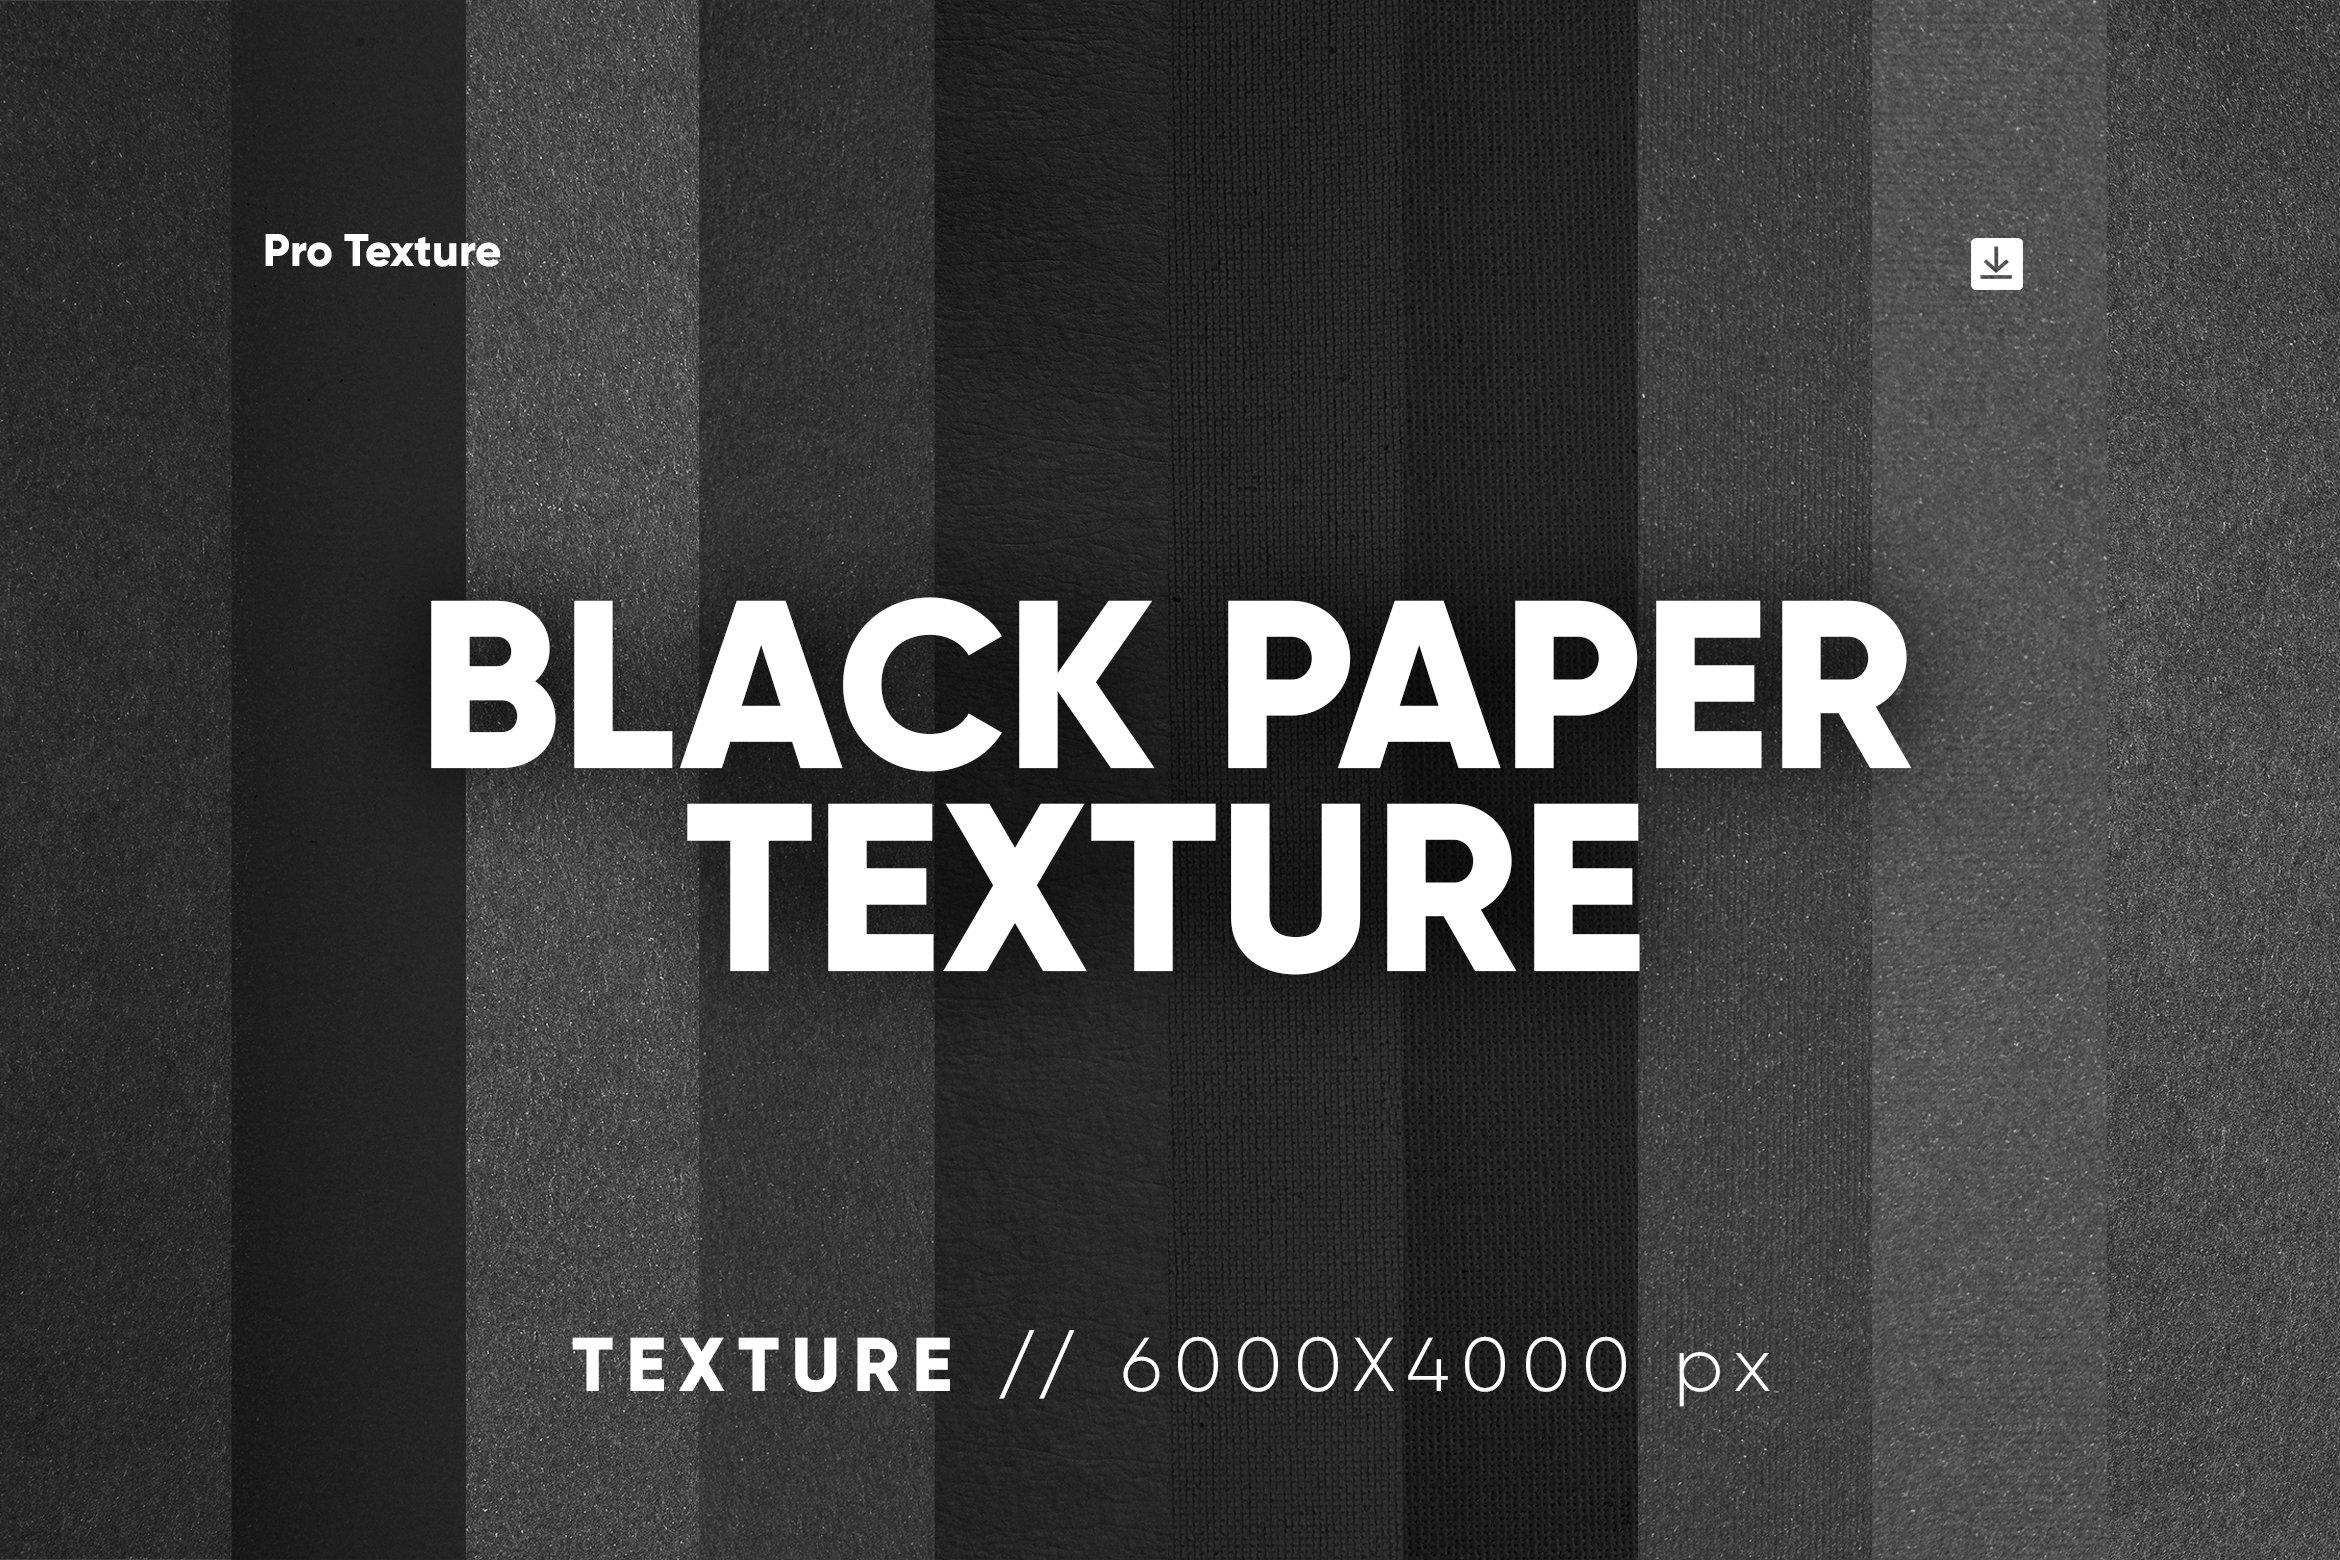 12 Black Paper Textures cover image.